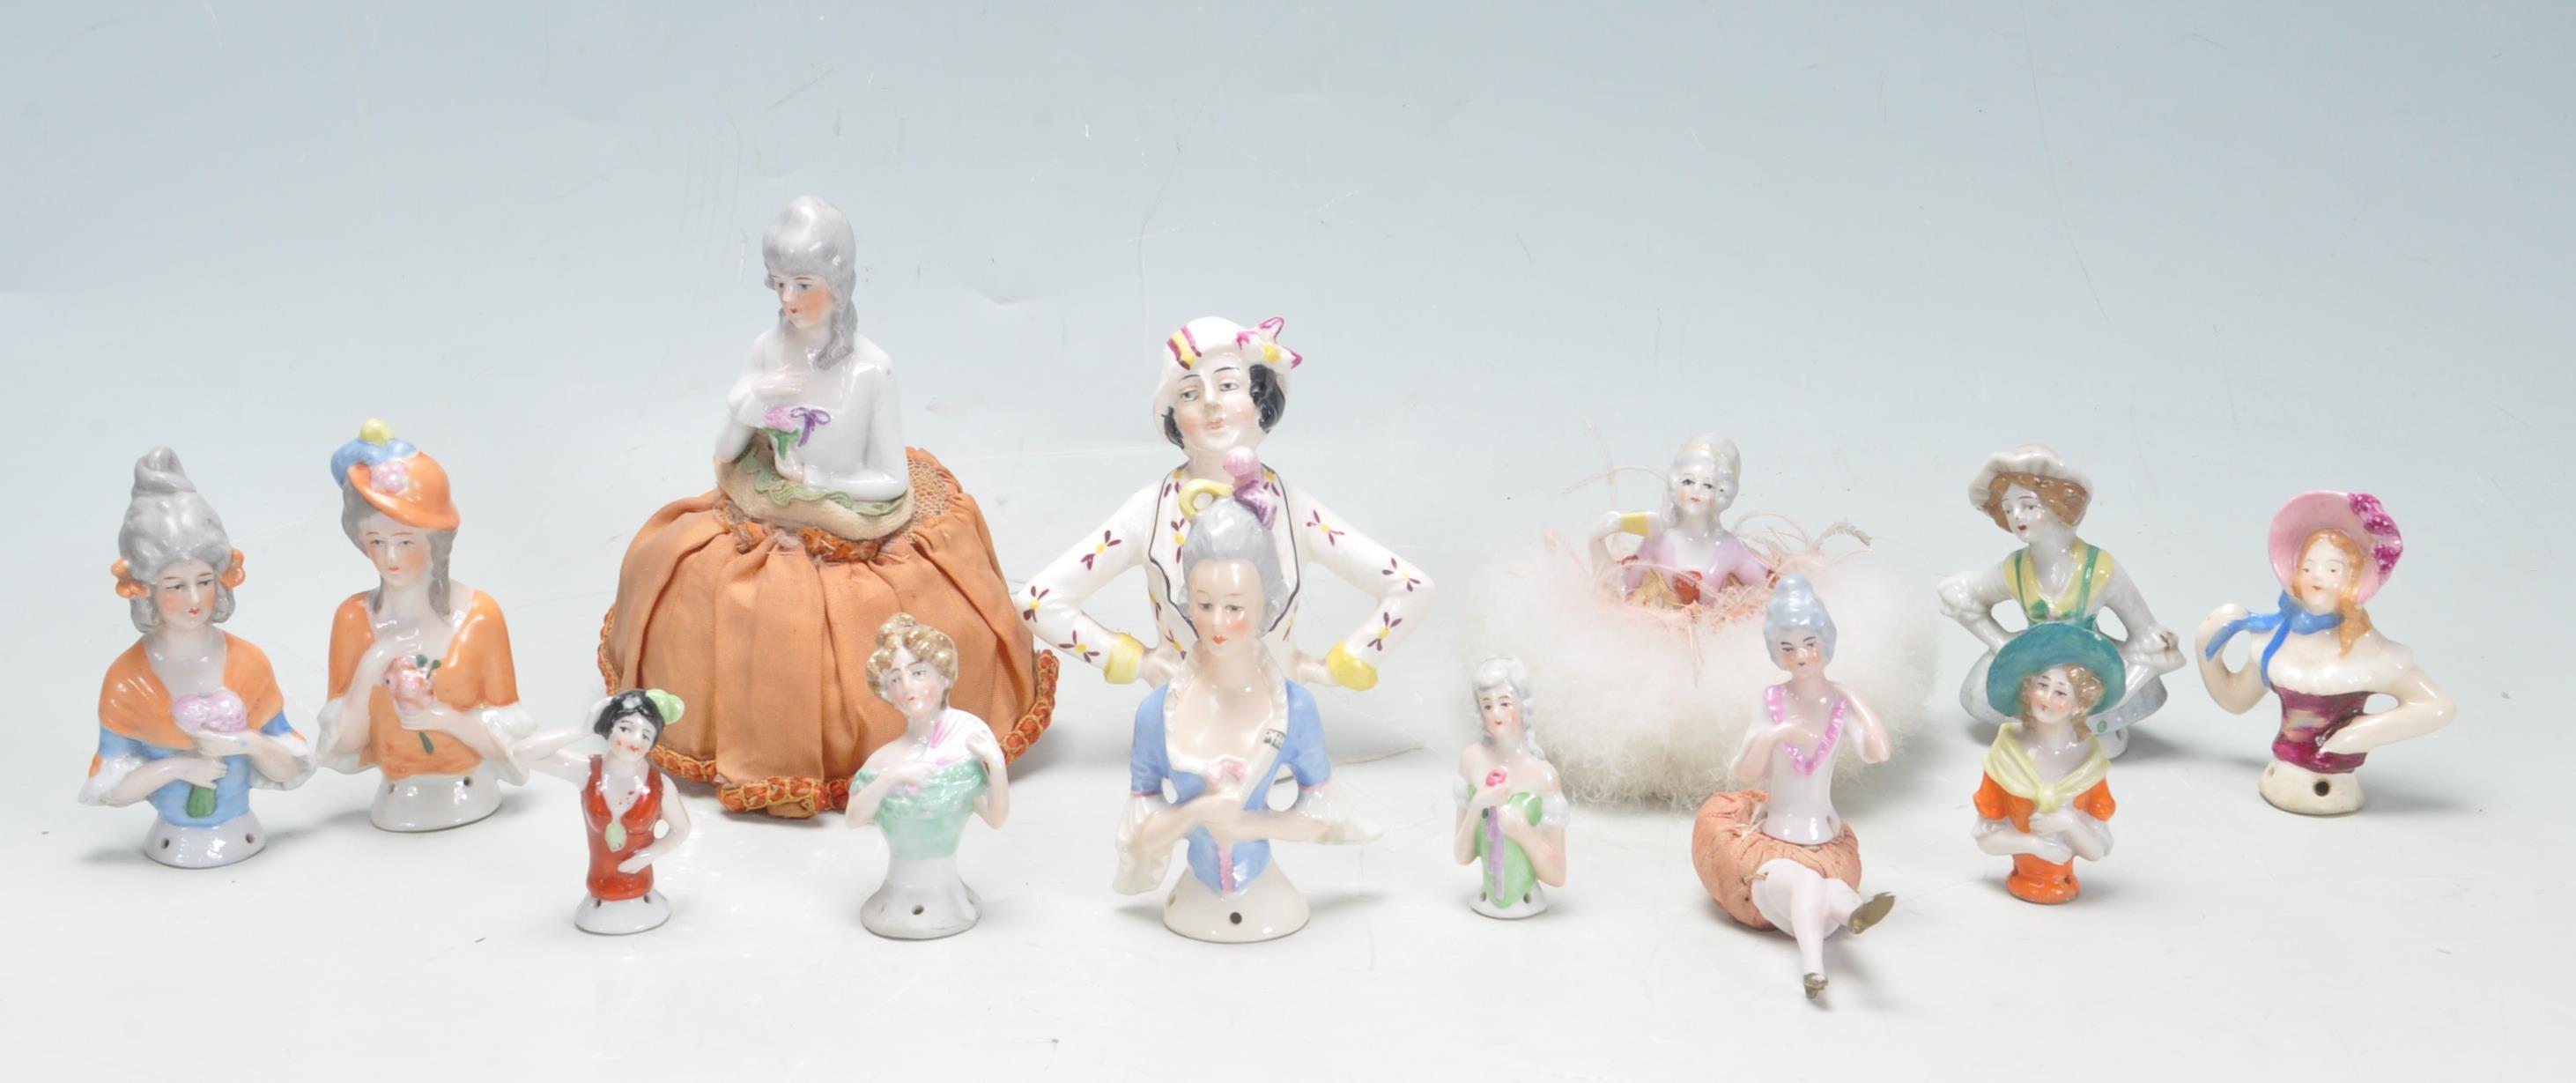 COLLECTION OF 28 PIN CUSHION HALF DOLLS